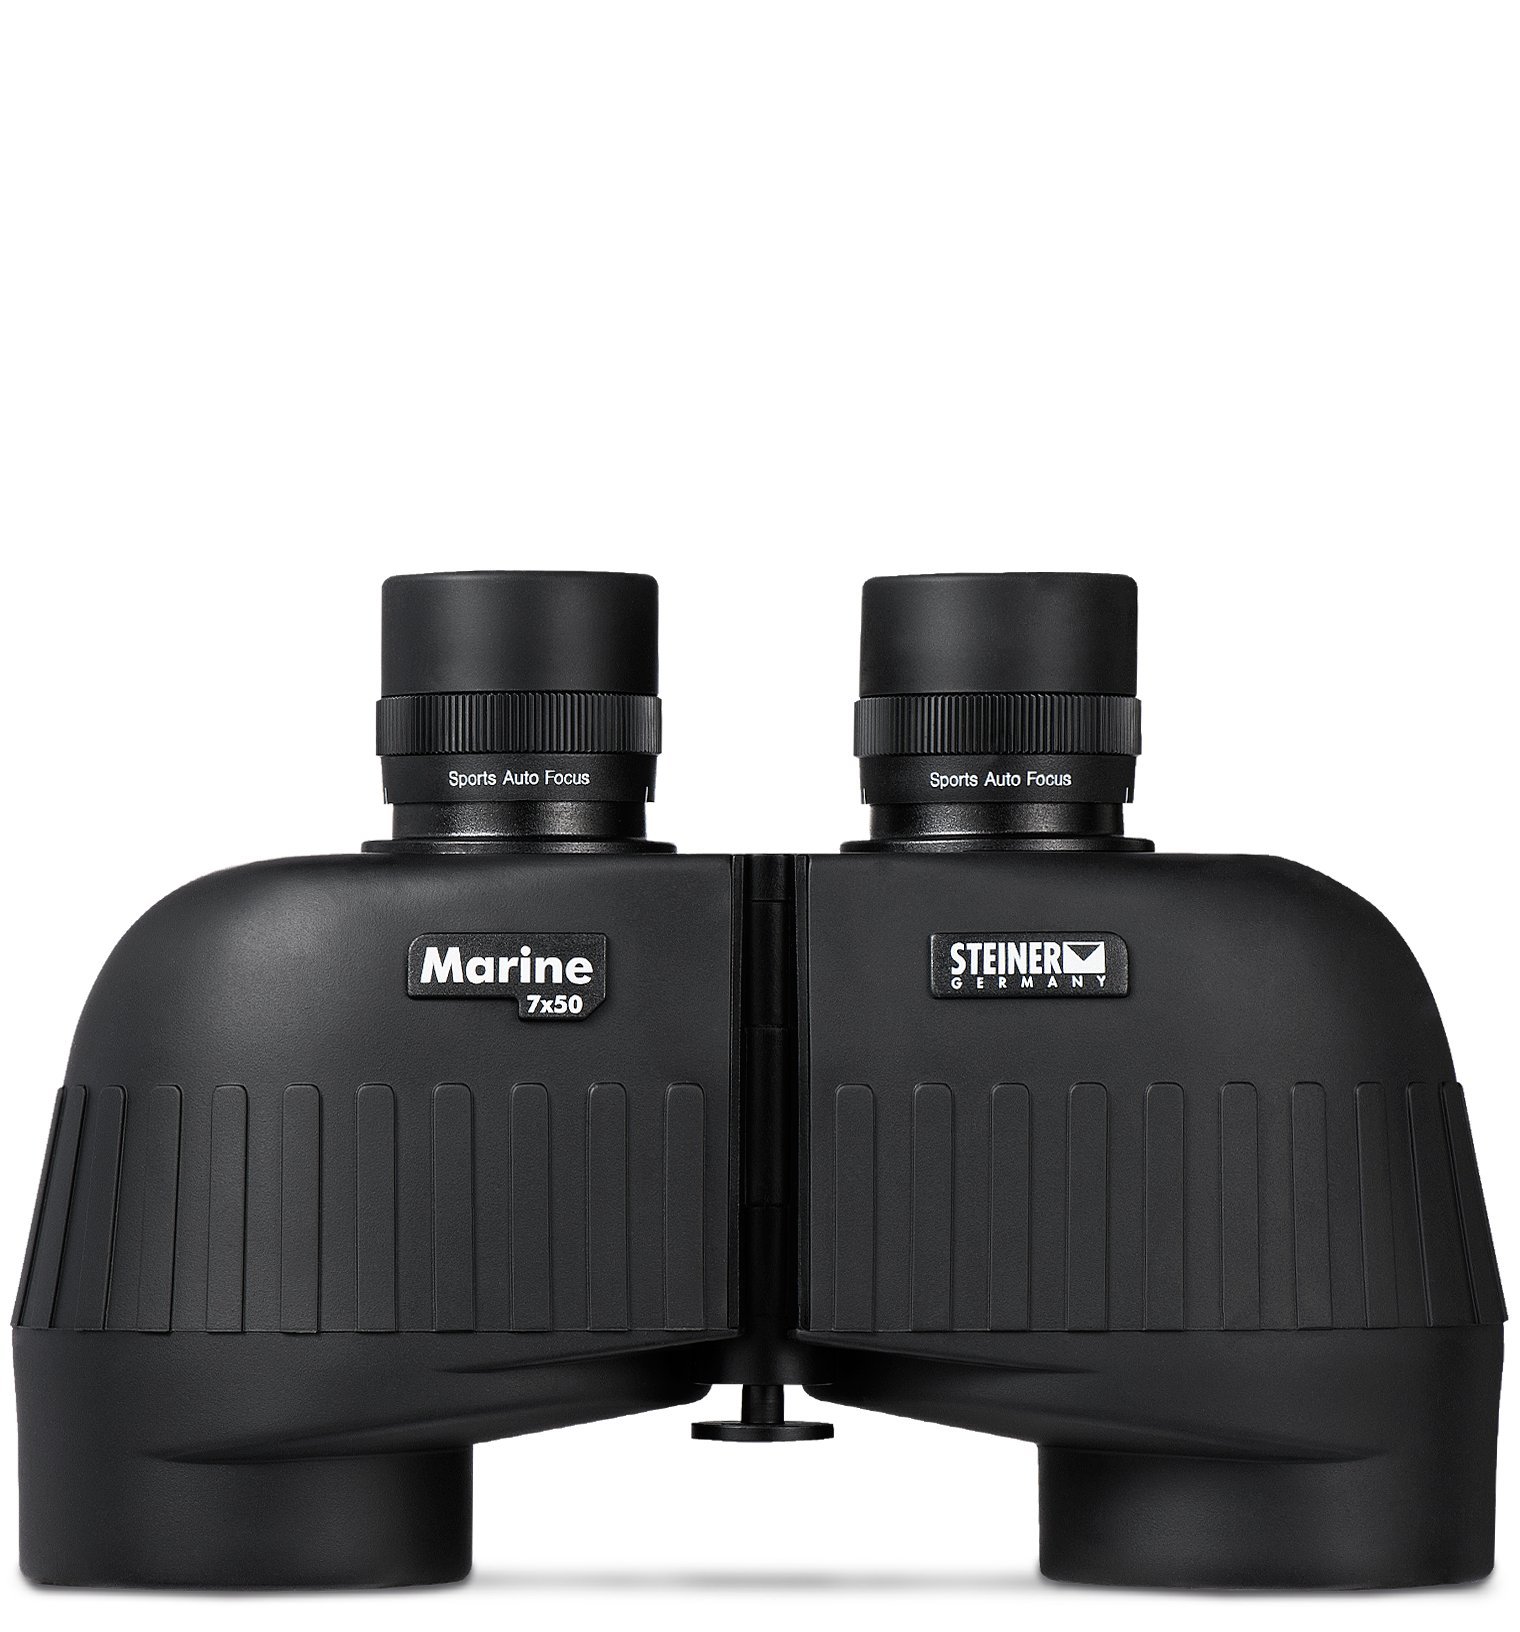 Steiner Marine Binoculars for Adults and Kids, 7x50 Binoculars for Bird Watching, Hunting, Outdoor Sports, Wildlife Sightseeing and Concerts - Quality Performance Water-Going Optics , Black